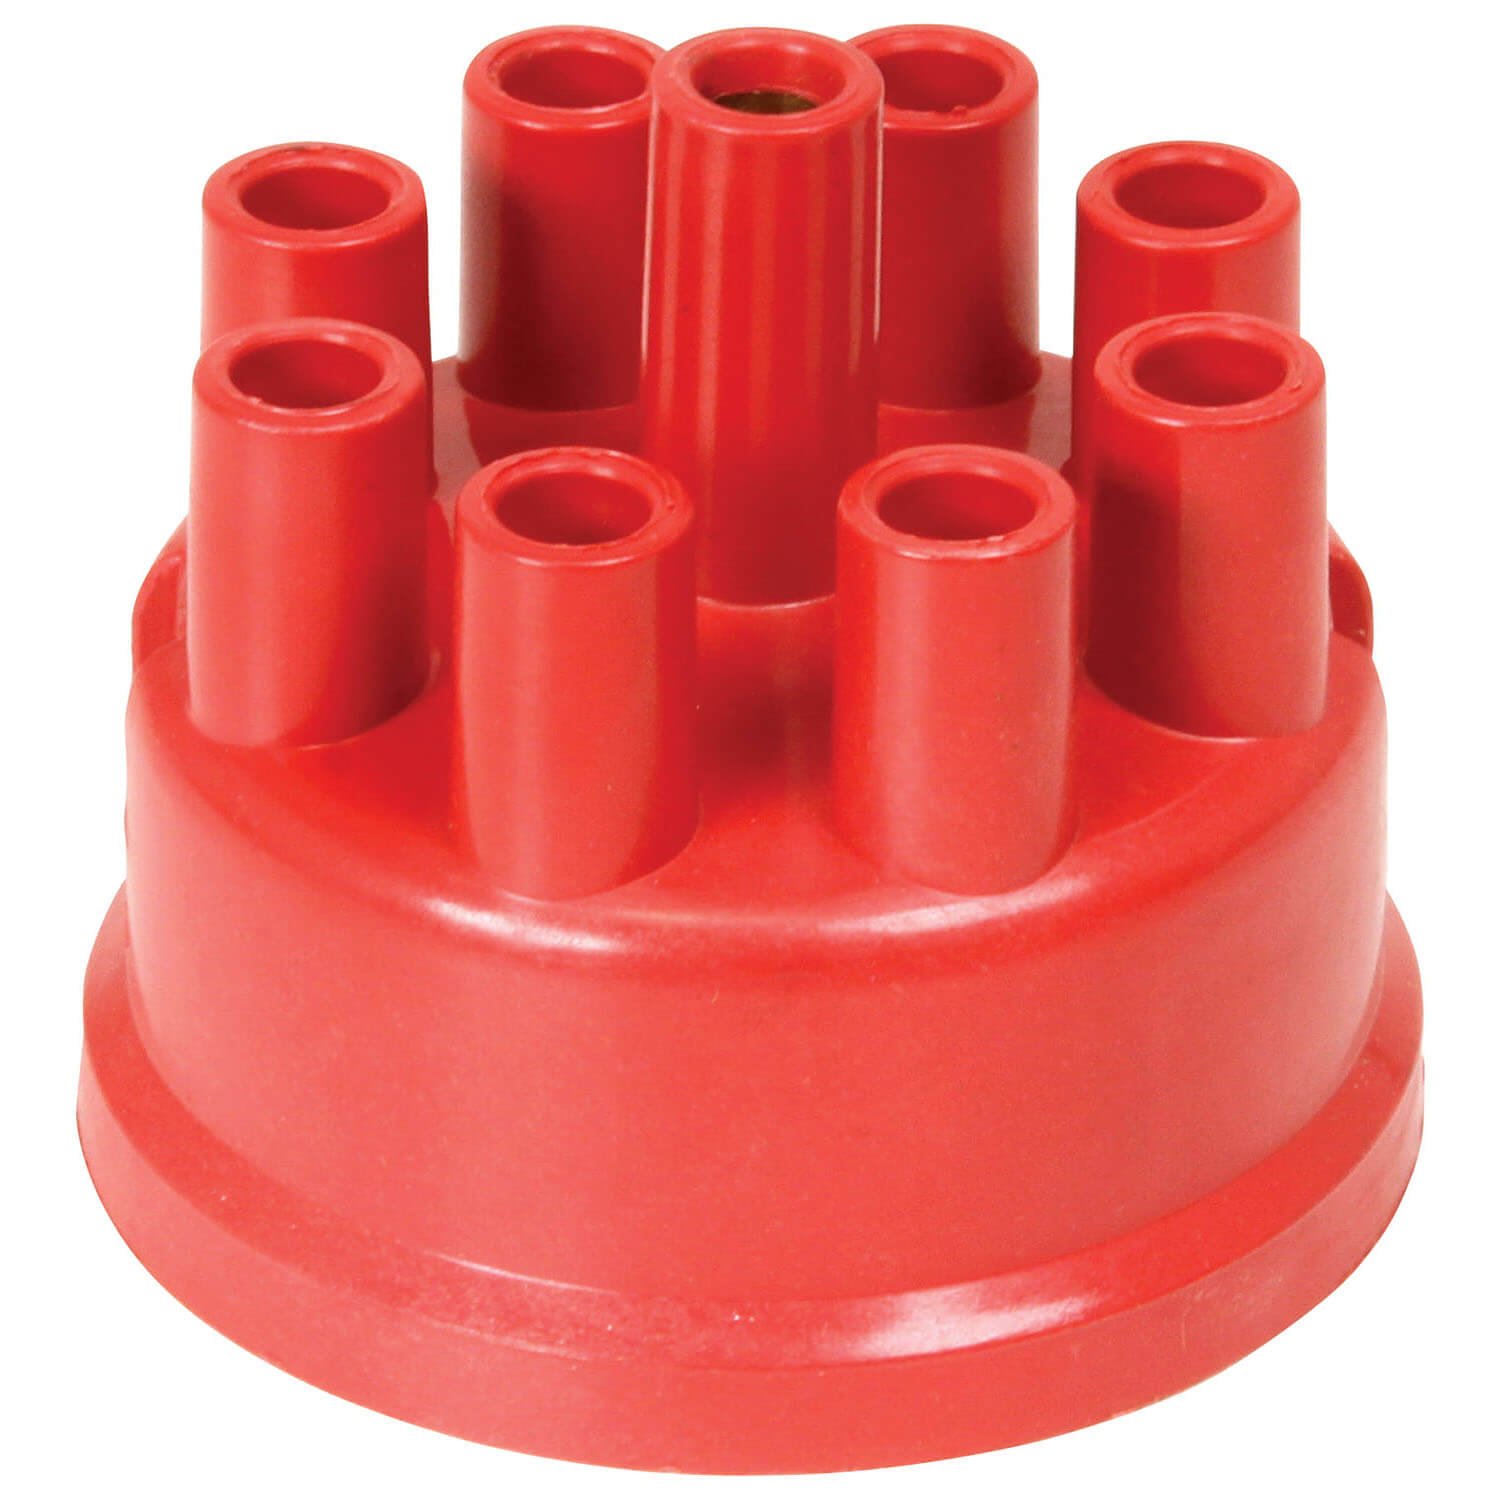 Female Distributor Cap For Mallory Series 25, 26, 27, 37, 38, 47, 50, 57, 61, & vented non-flame arrested YL